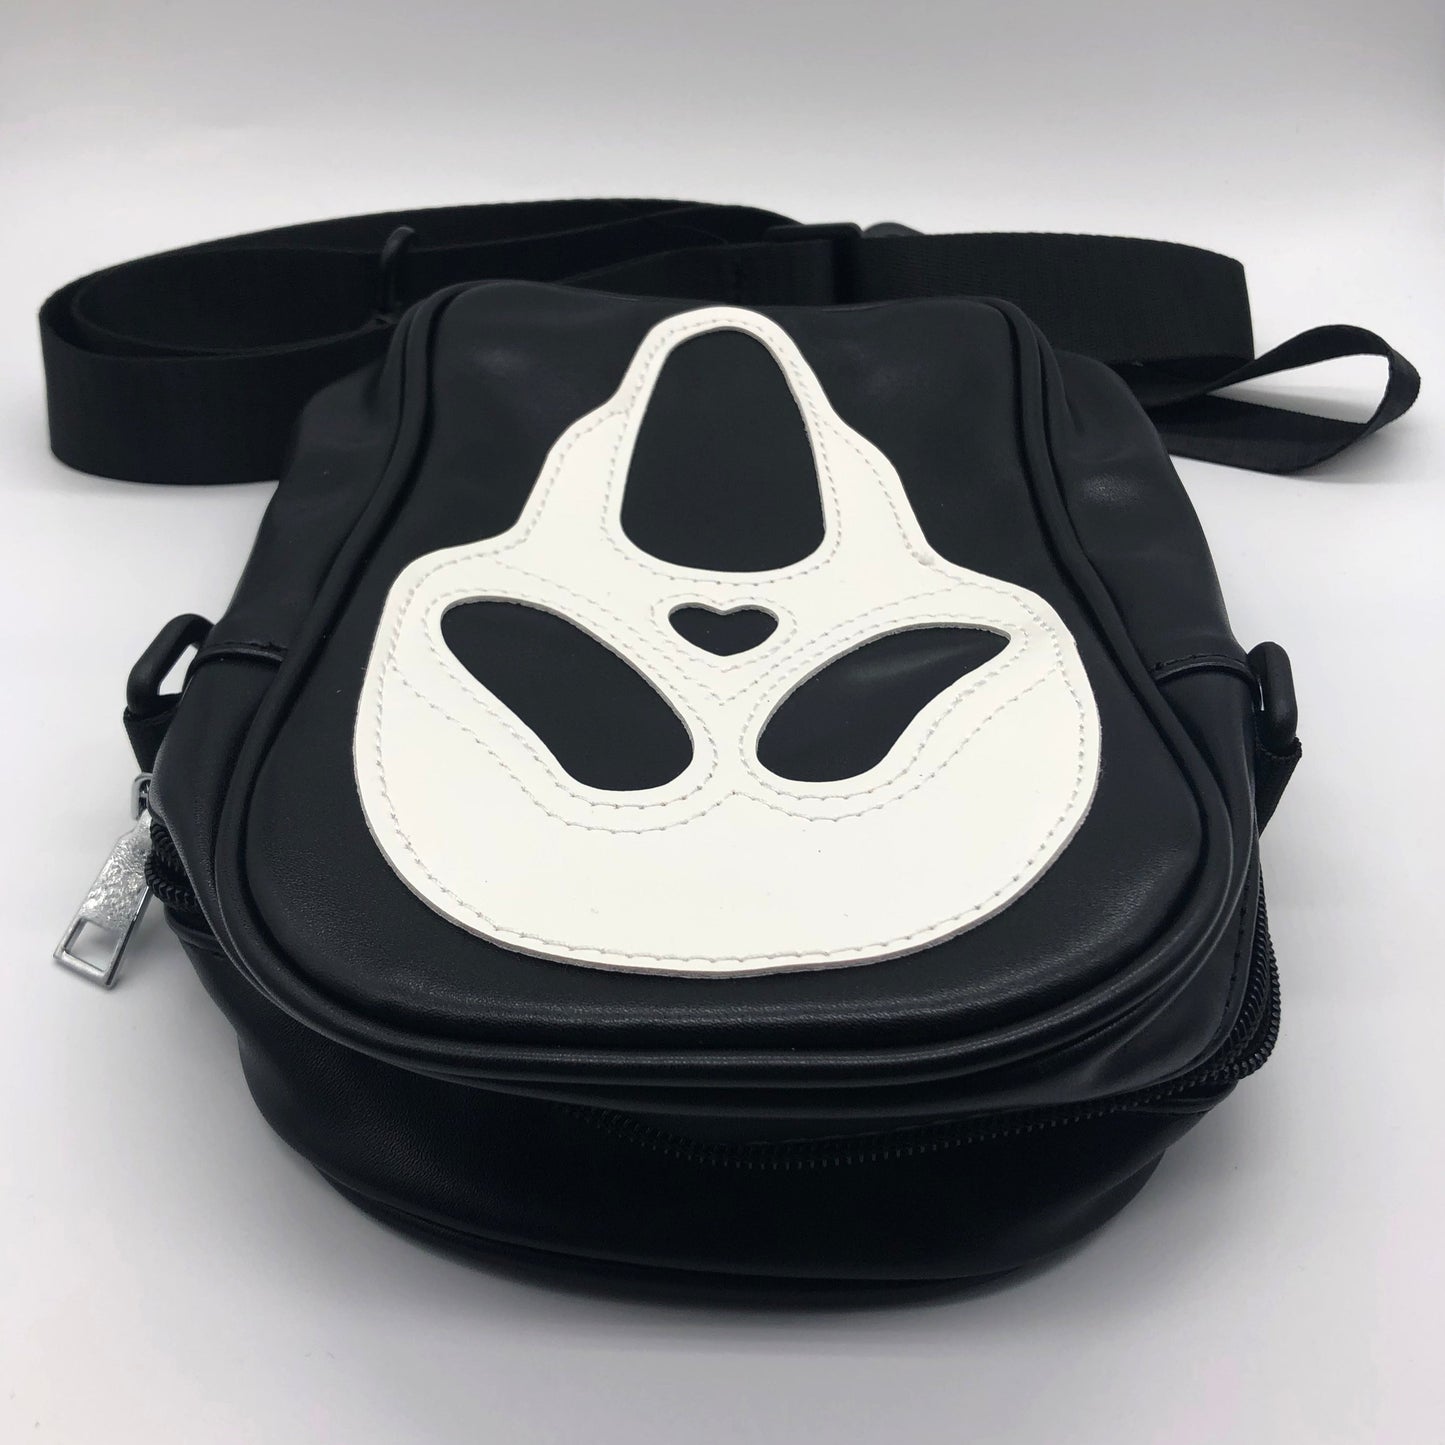 Top view of the zip from the Ghostface shoulder bag by Horrorfier